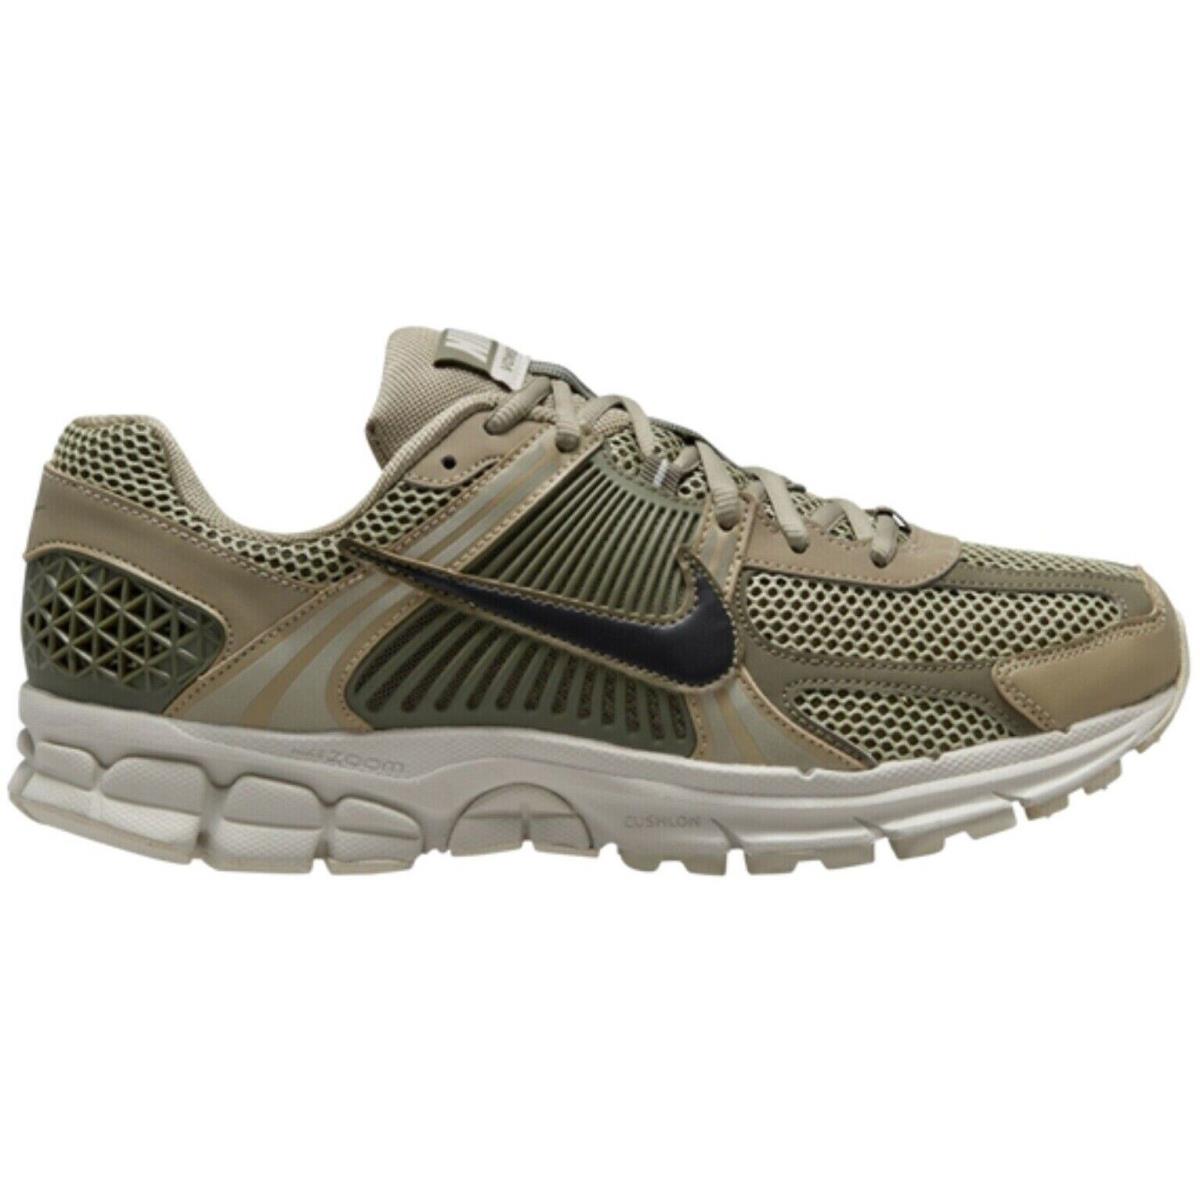 Nike Zoom Vomero 5 Men`s Casual Shoes All Colors US Sizes 7-14 Neutral Olive / Black / Medium Olive